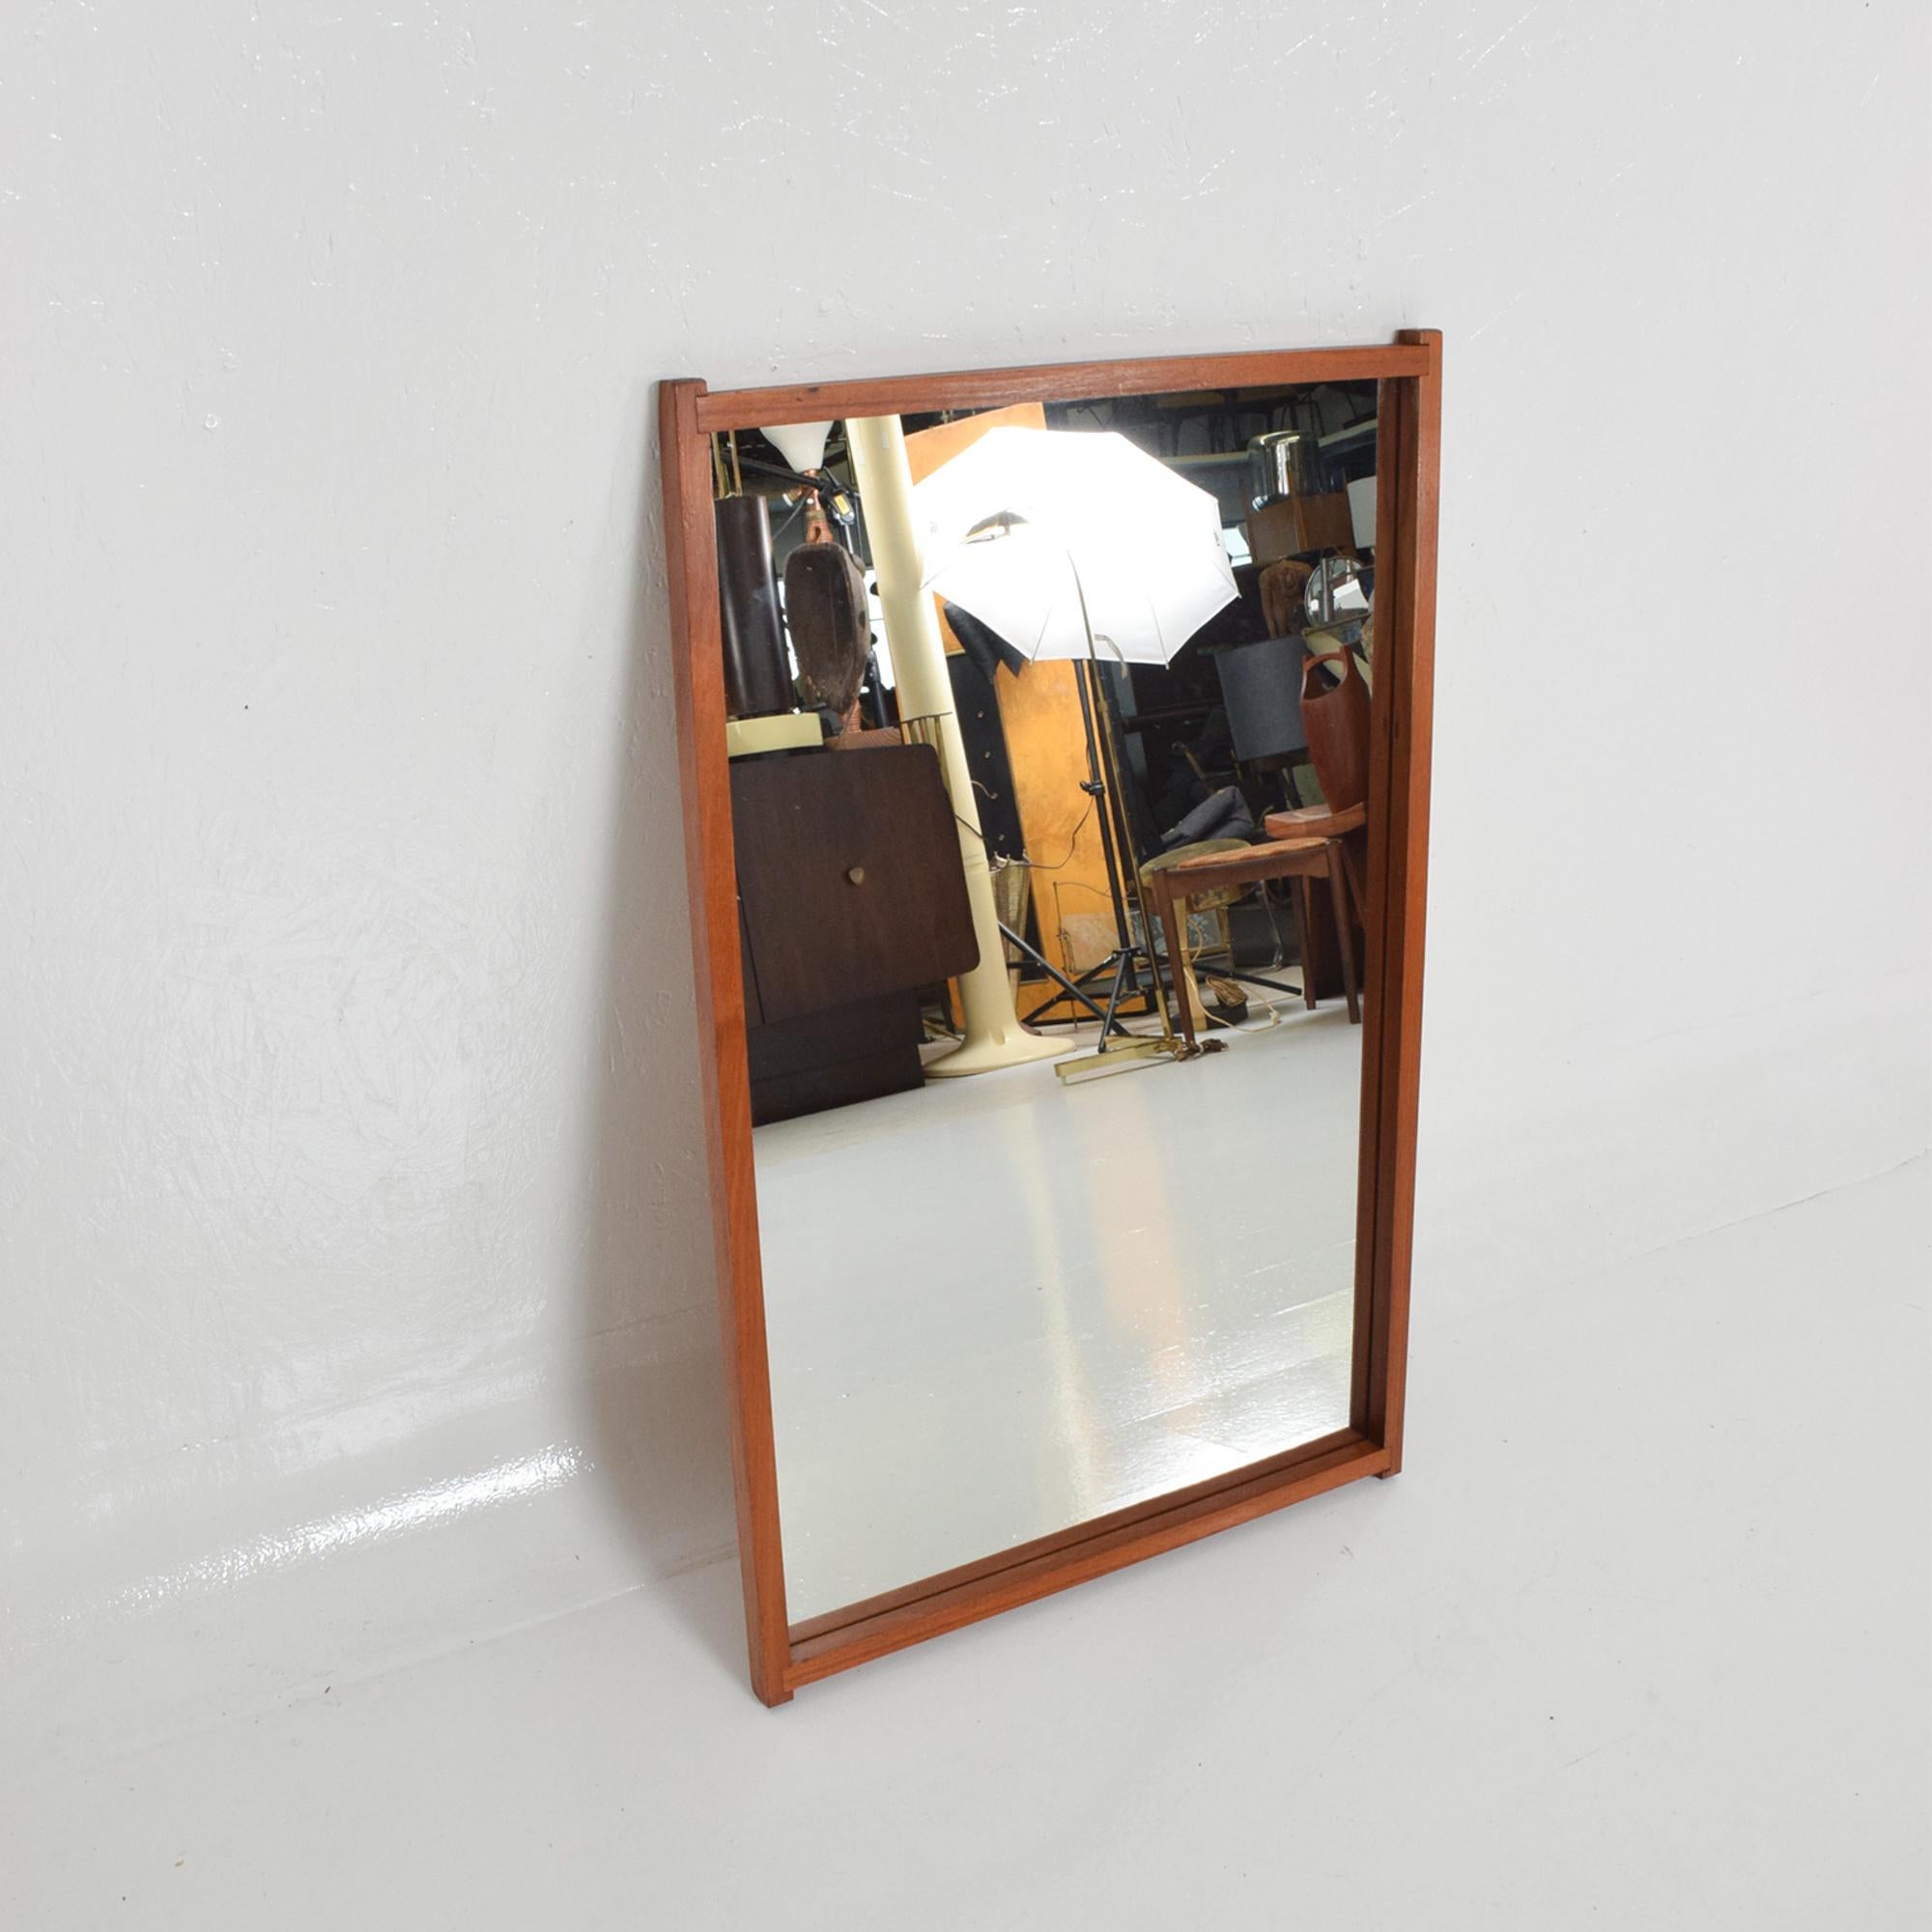 Vintage Scandinavian modern teak wall mirror, circa late 1970s
Solid teak wood frame with glass mirror.
In the style of Midcentury Danish modern designers Pedersen and Hansen and Aksel Kjersgaard.
No label present from the maker.
Dimensions: 38